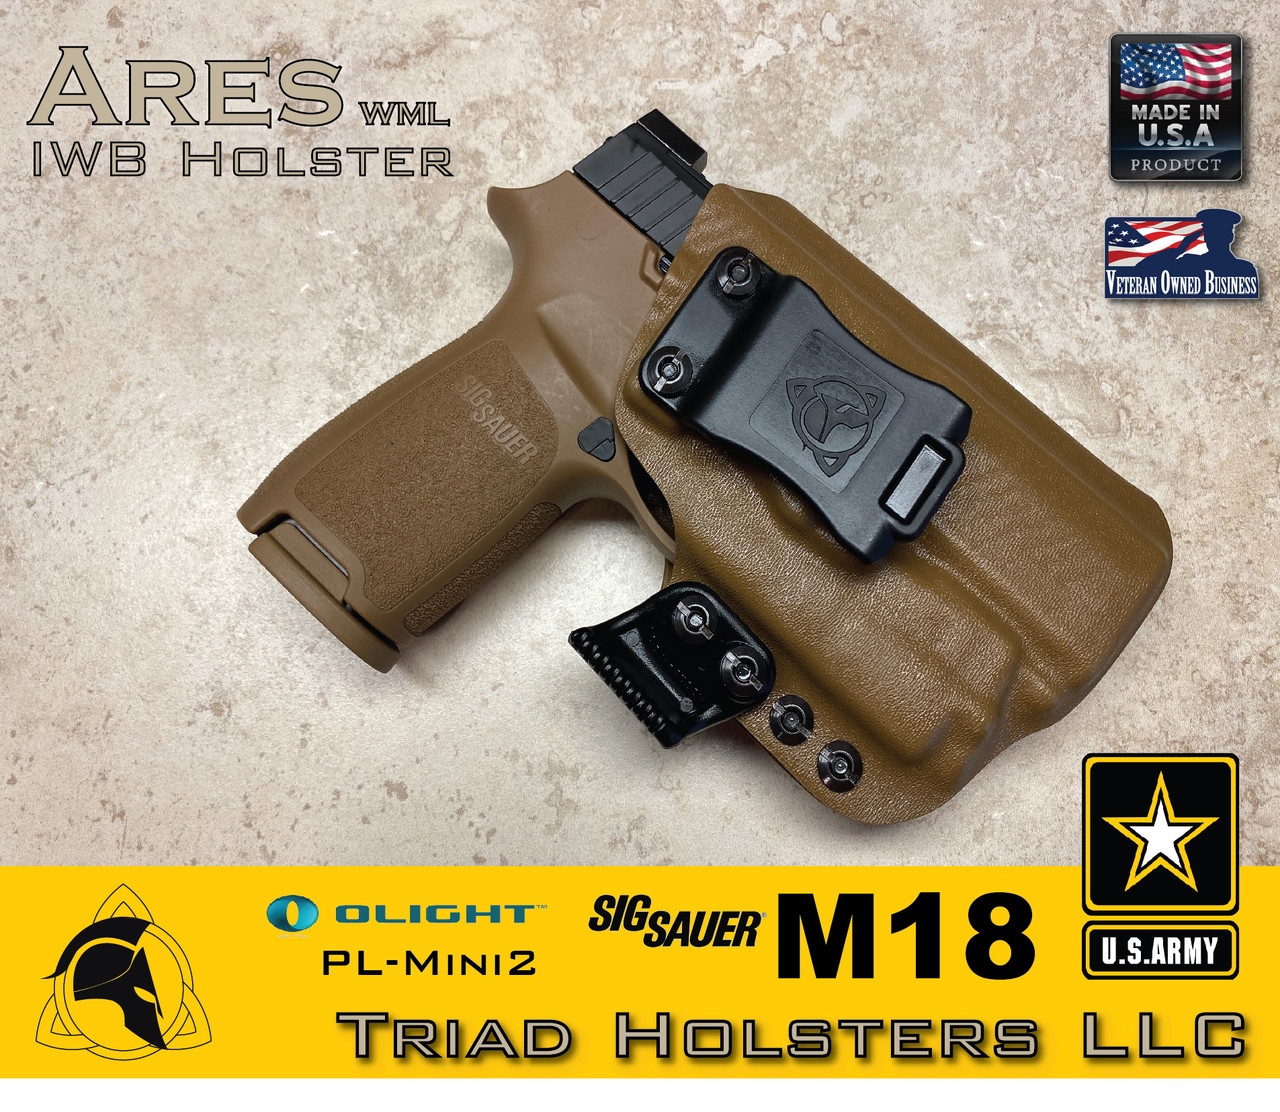 m18 sig holster sauer olight ares kydex iwb waistband inside p365xl wml mini2 holsters dot weapon tan clip coyote tlr